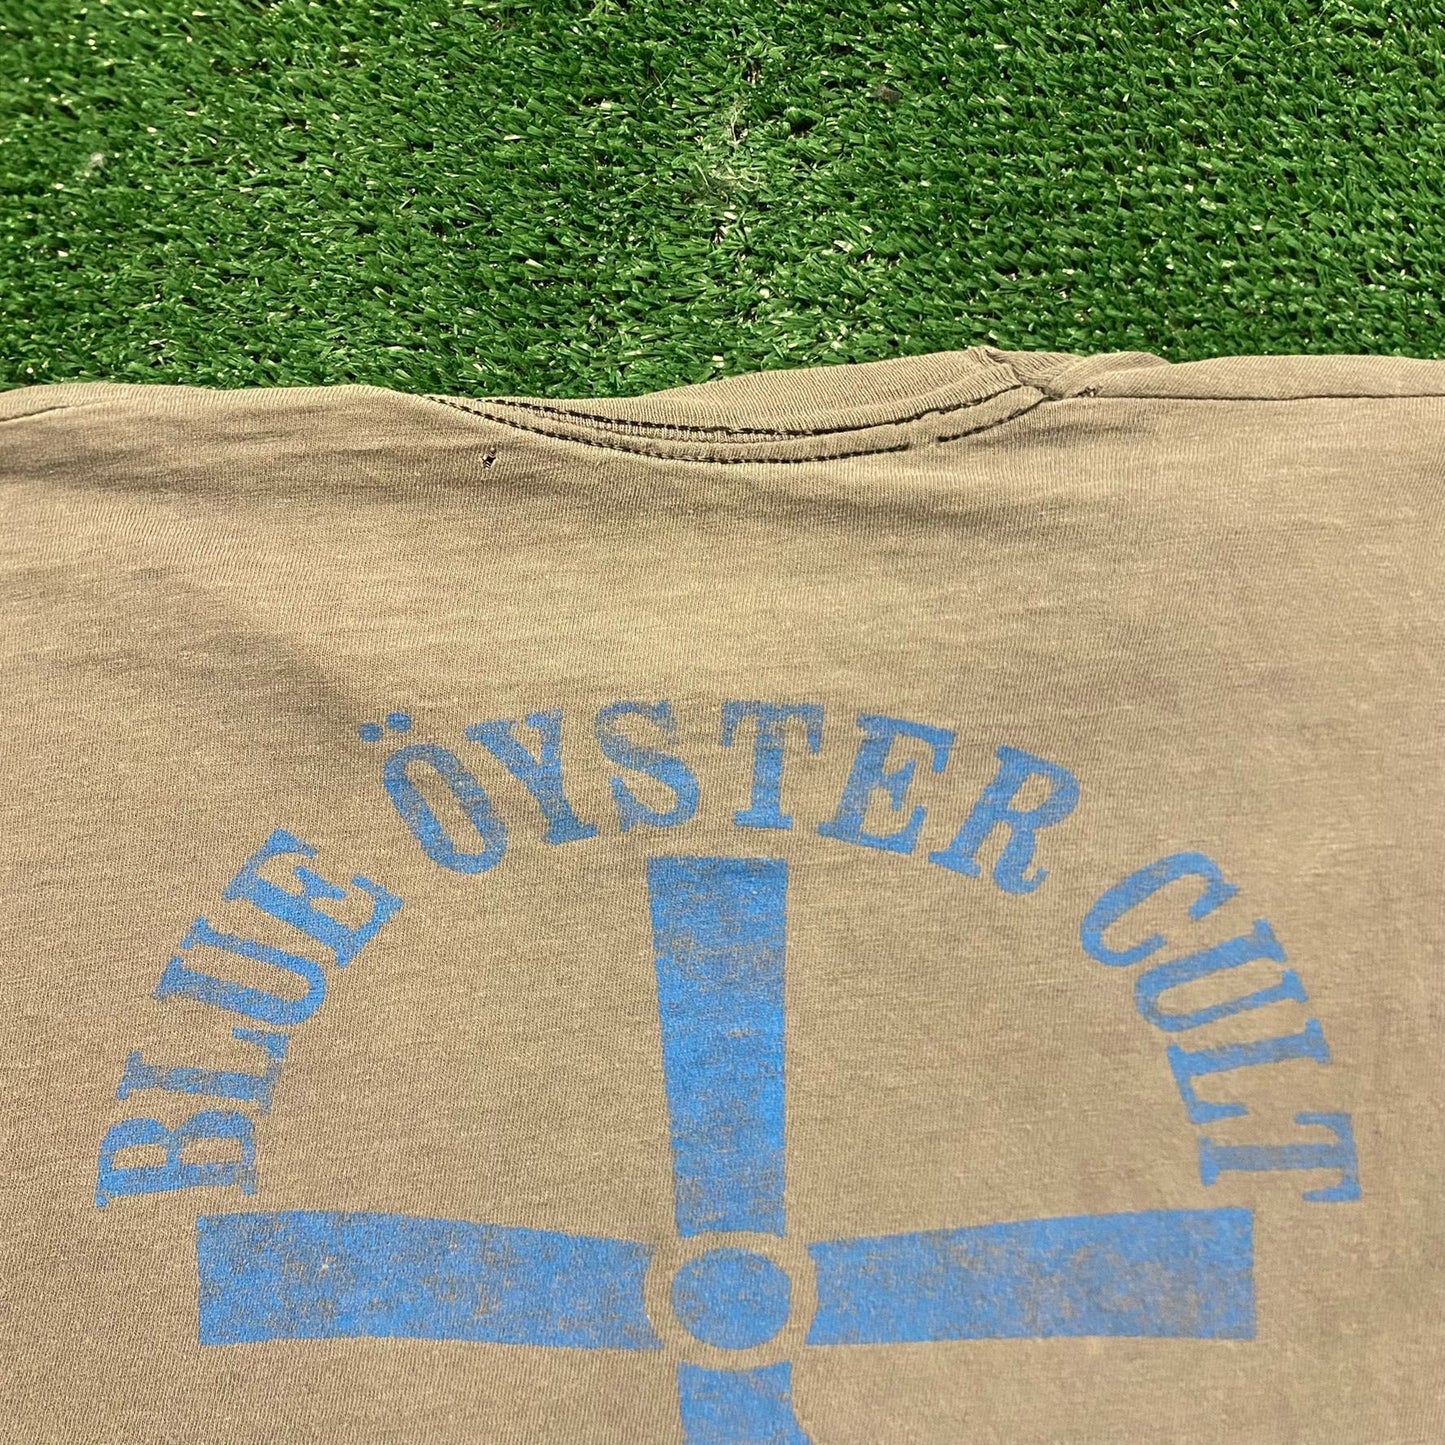 Vintage 80s Essential Sun Faded Blue Oyster Cult Rock Band T-Shirt